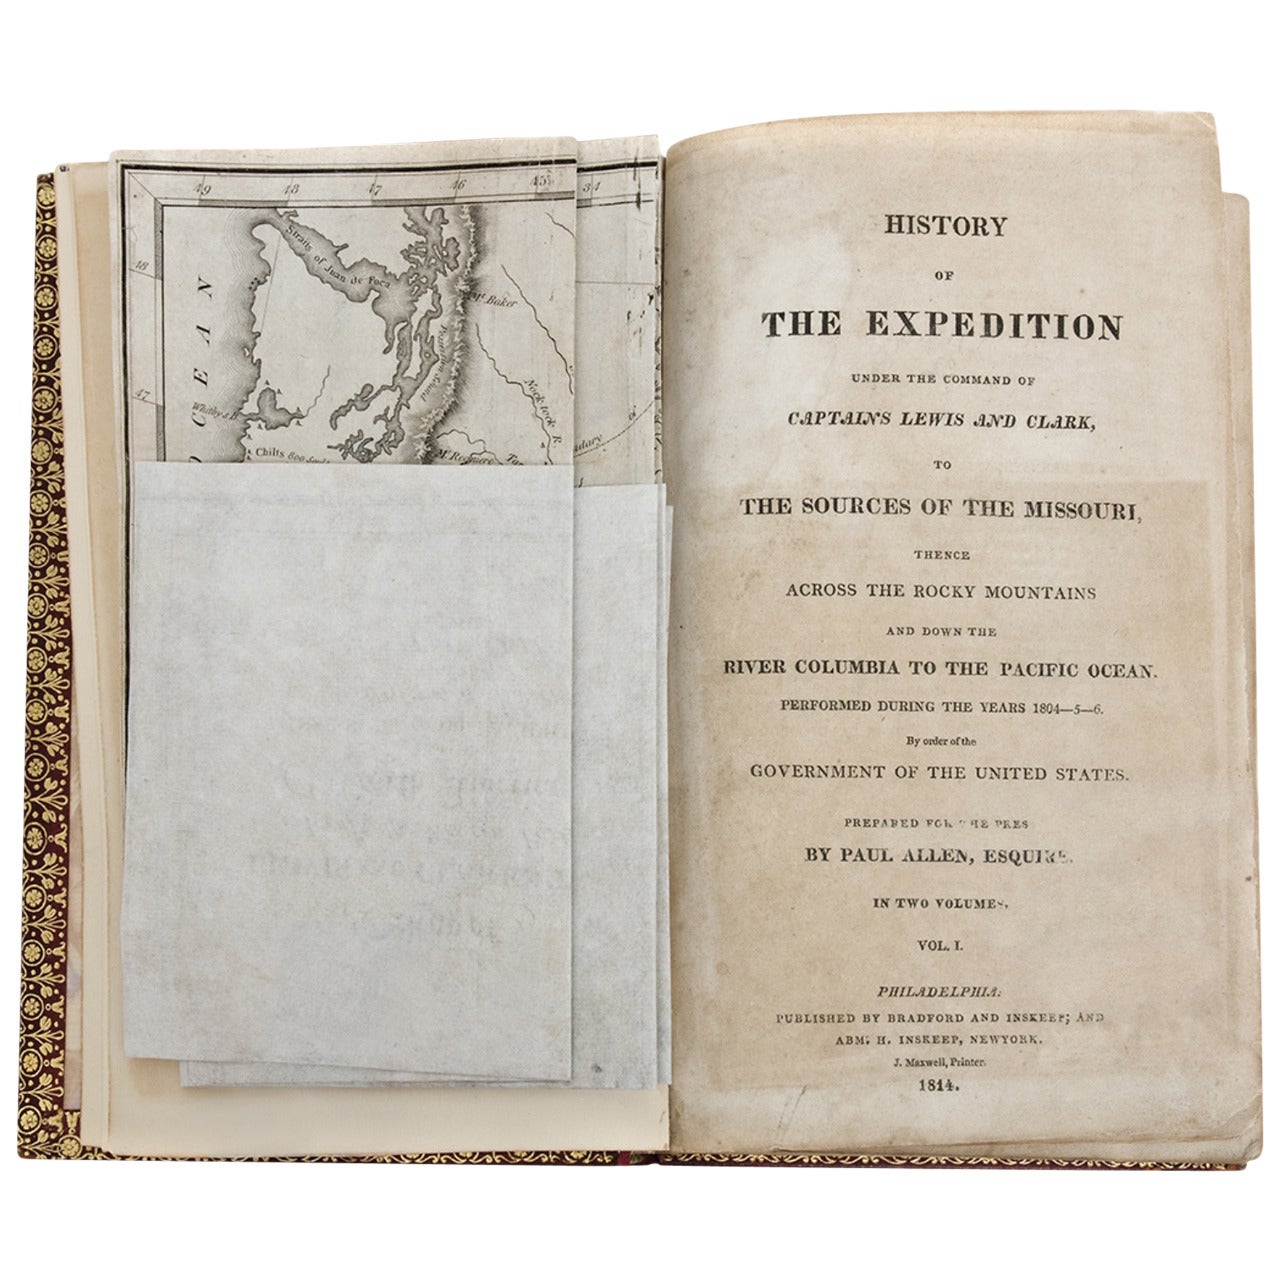 "History of The Expedition Under the Command of Captains Lewis and Clark" Books For Sale